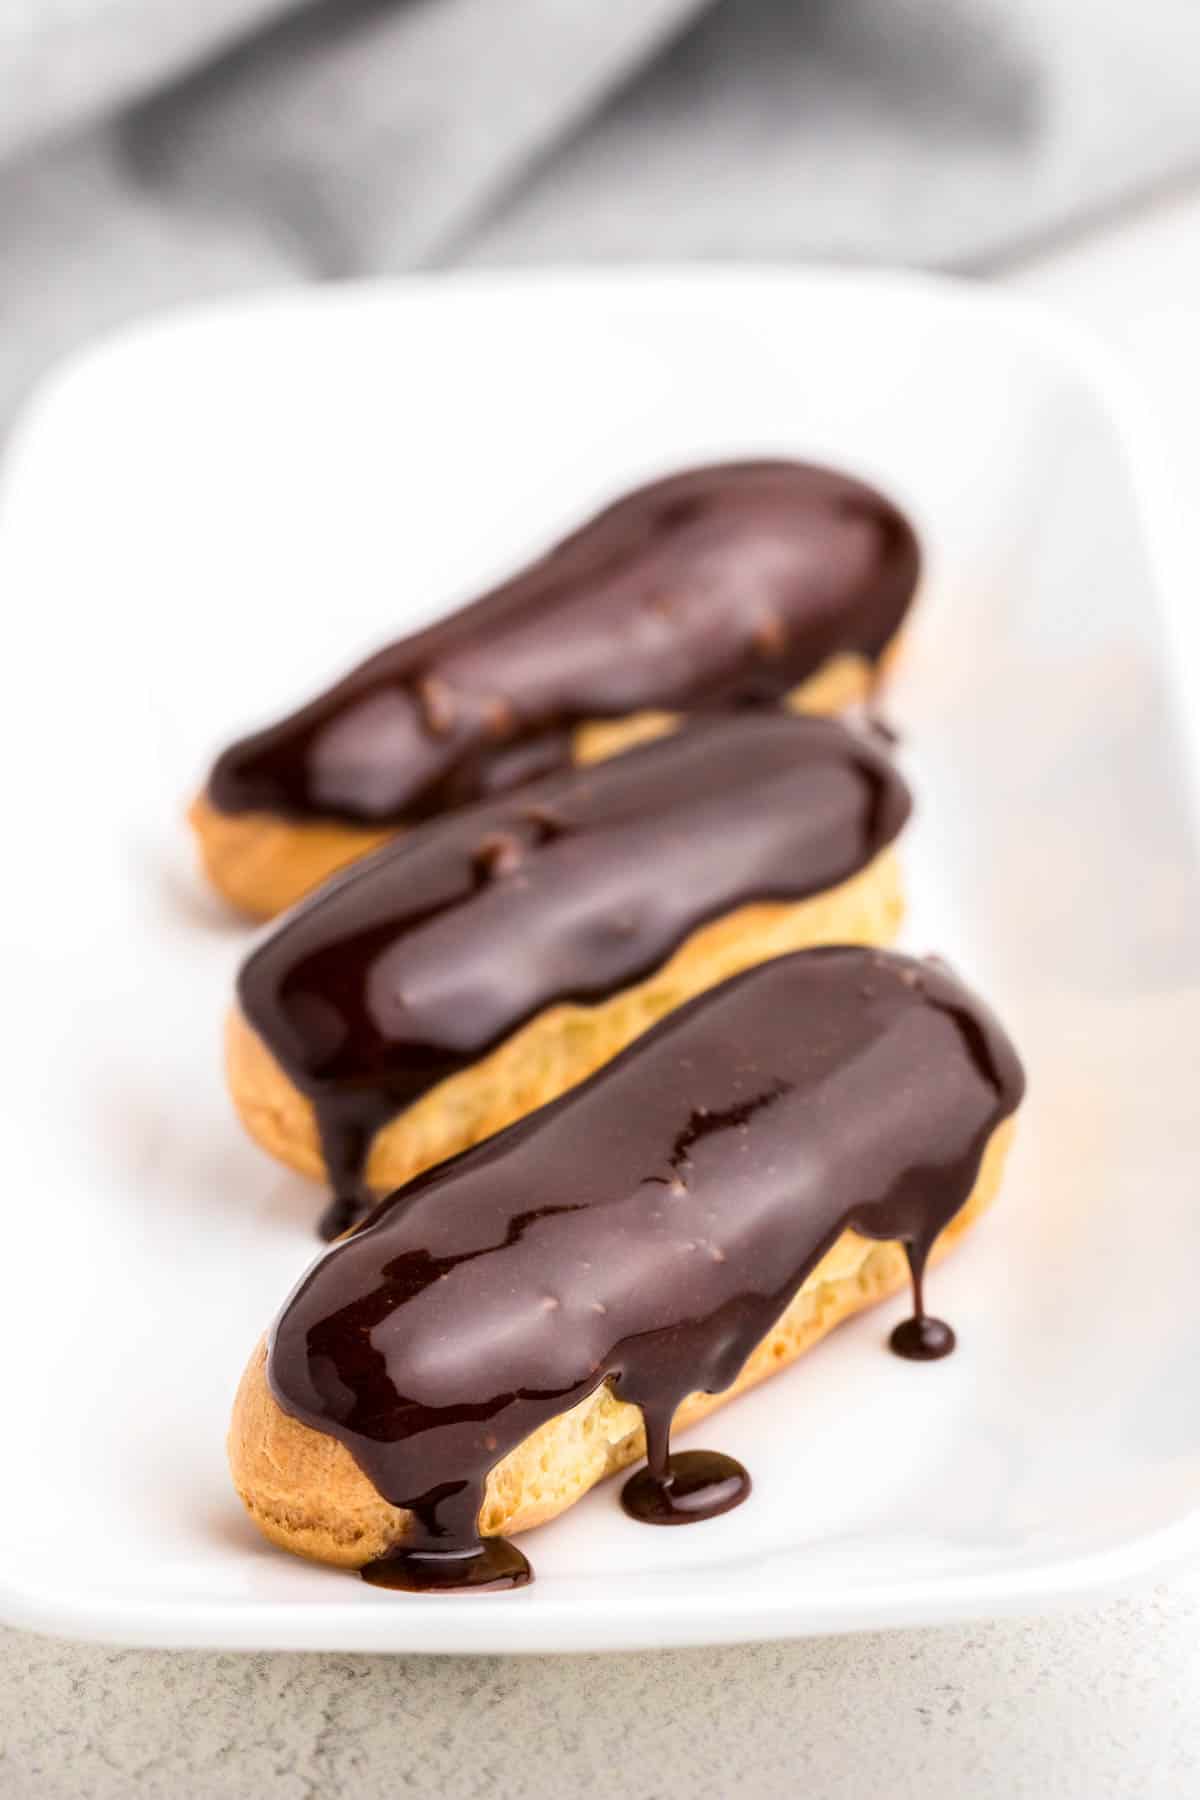 Three chocolate eclairs on a plate.